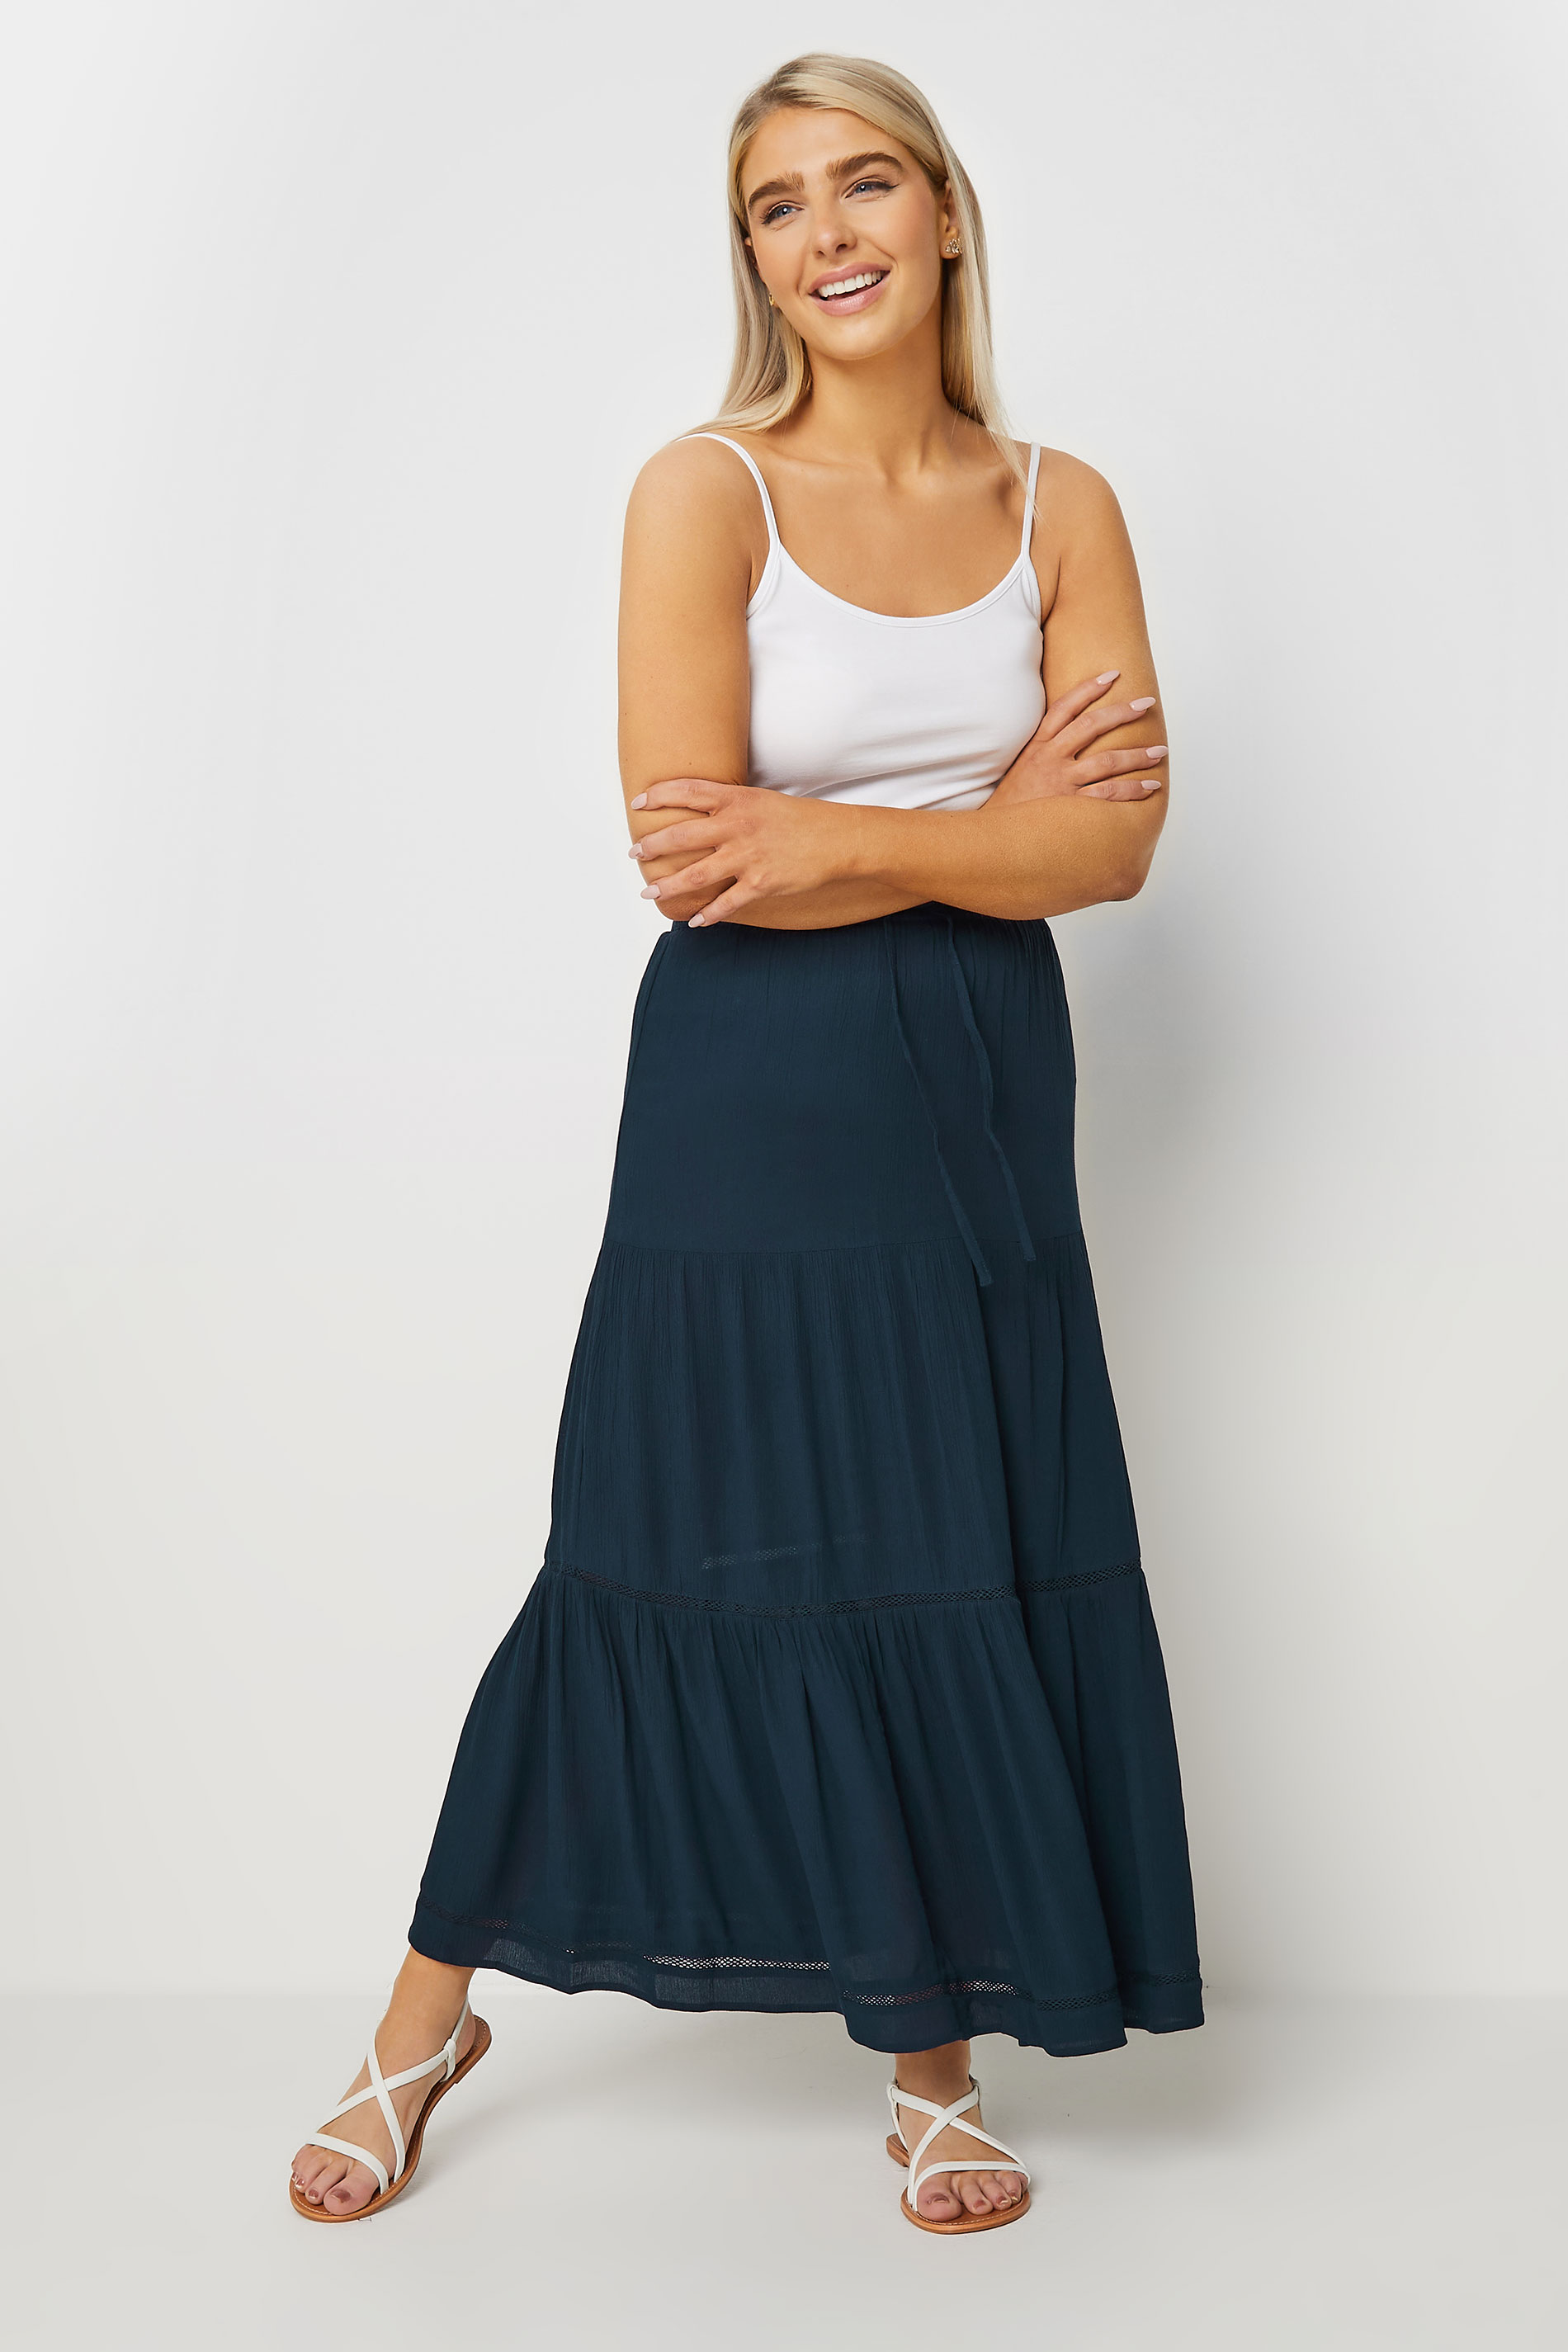 M&Co Navy Blue Tiered Maxi Skirt | M&Co 3